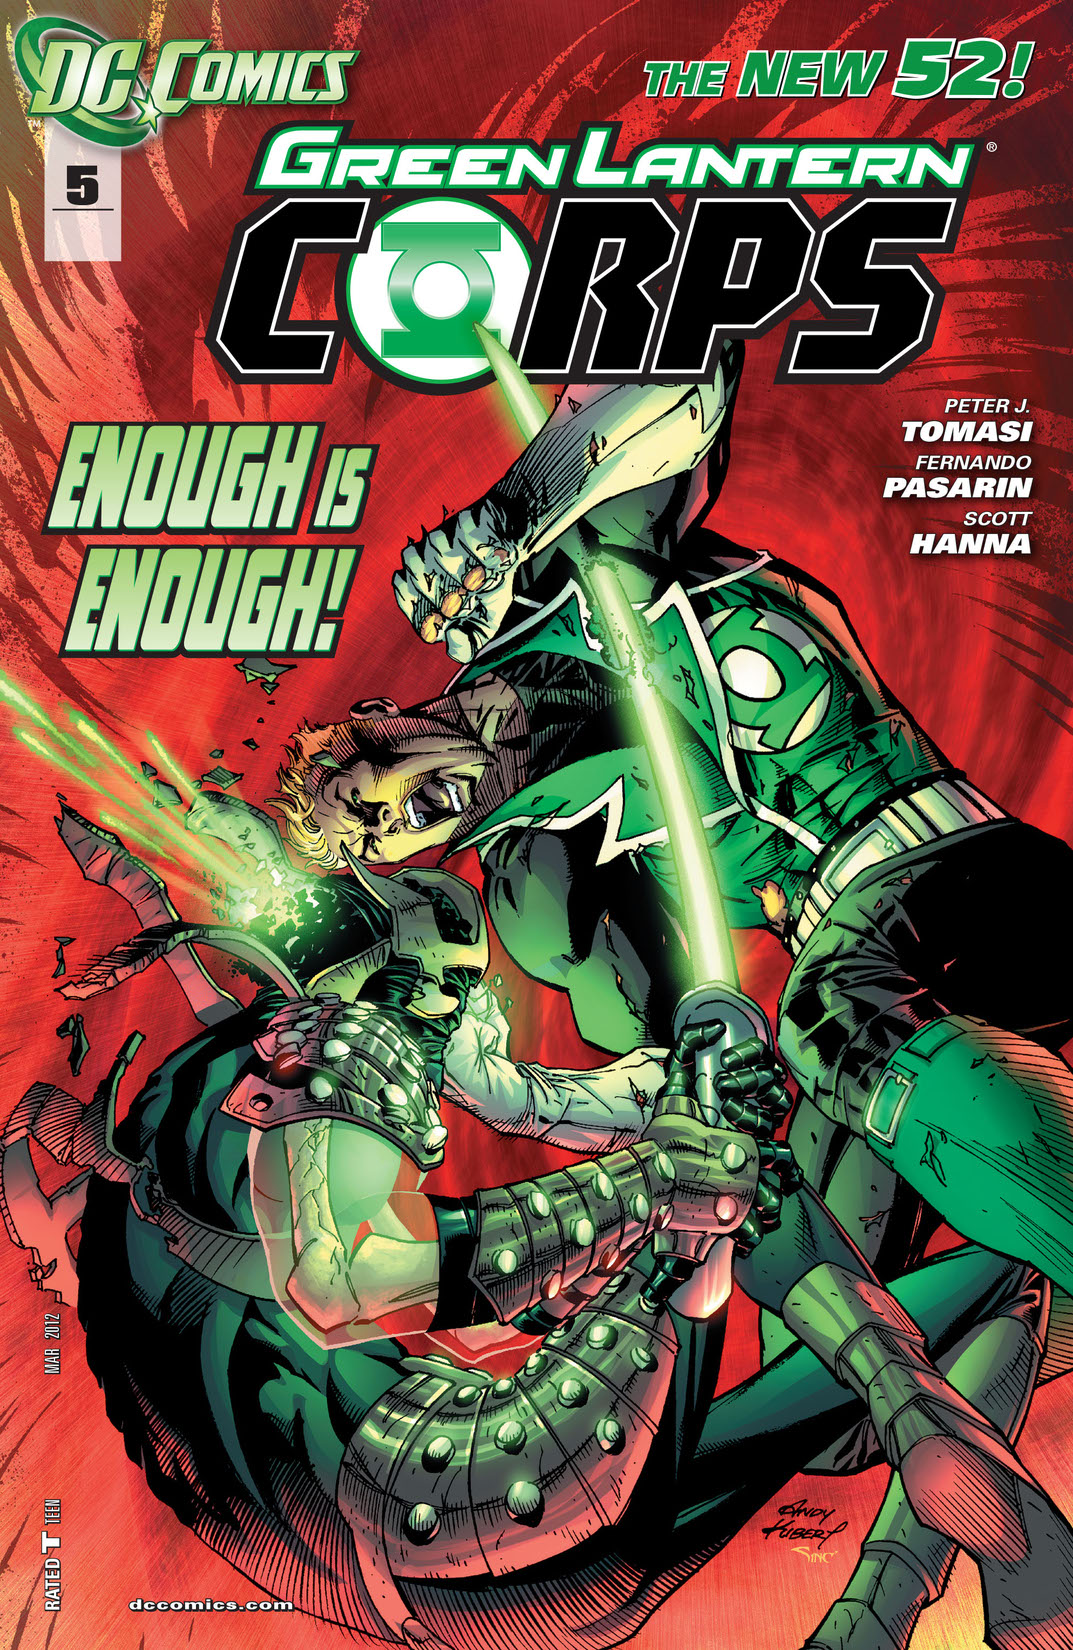 Green Lantern Corps (2011-) #5 preview images